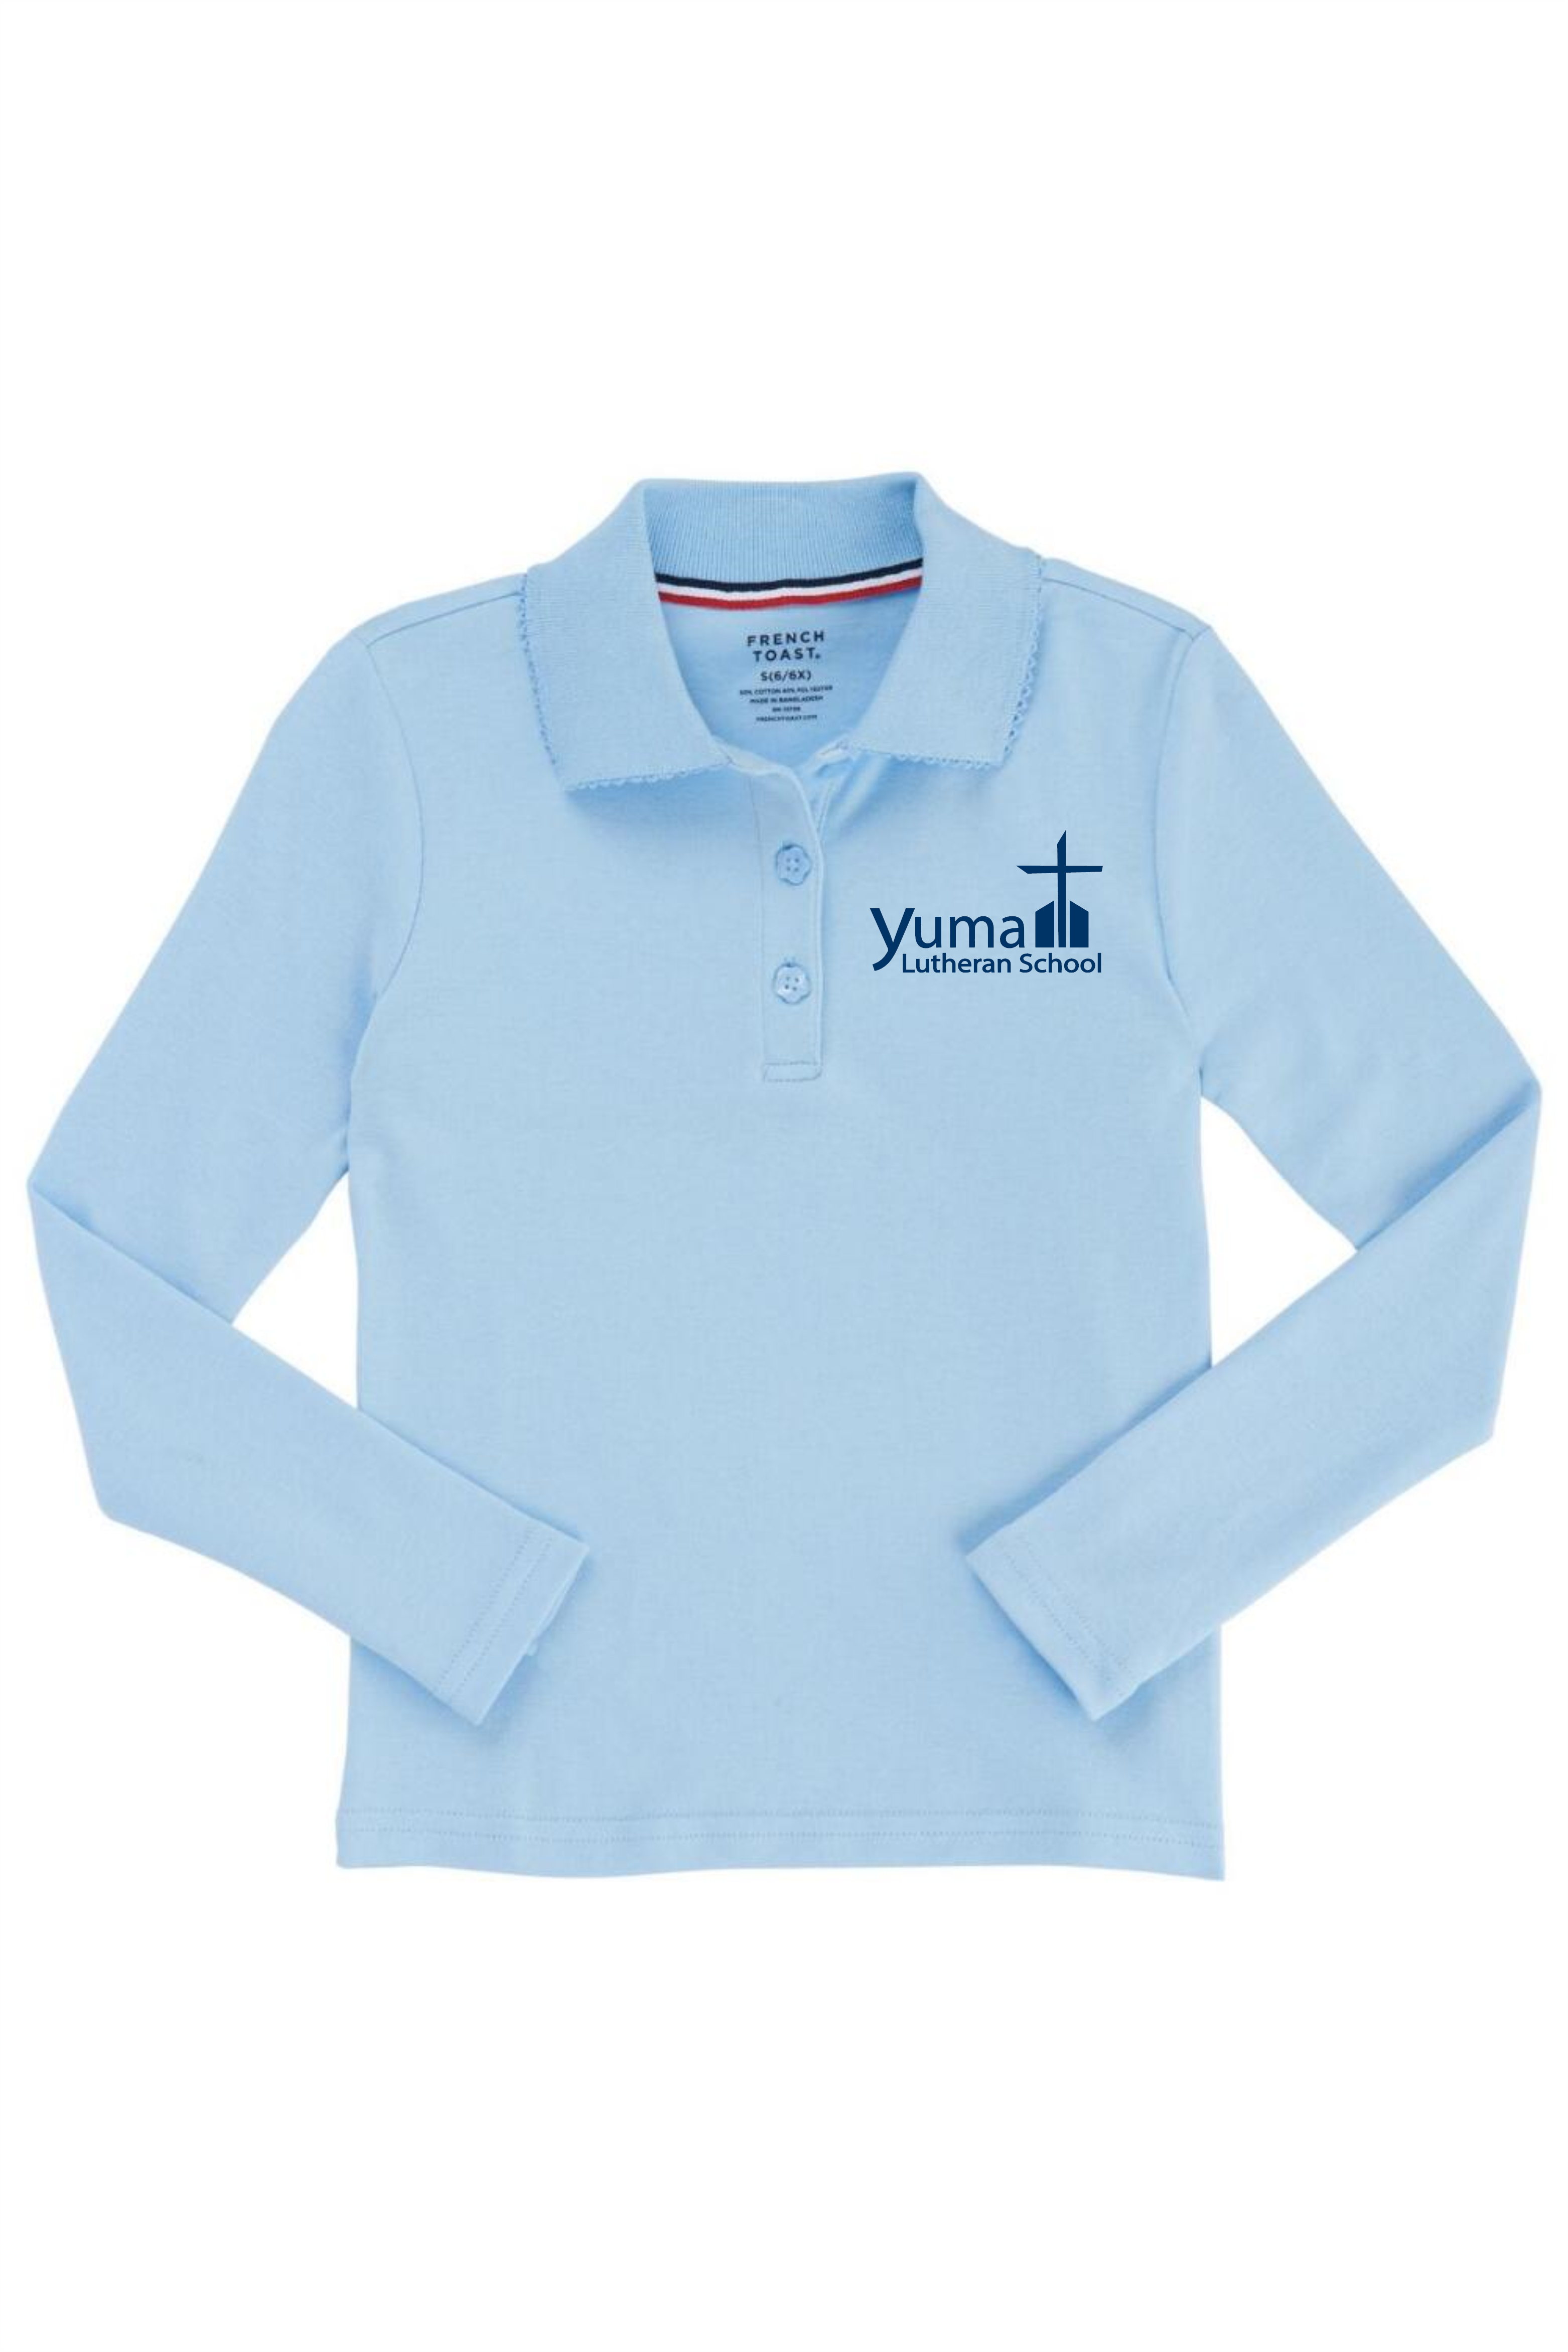 French Toast Girl's Long Sleeve Interlock Knit Polo with Picot Collar (Feminine Fit) (Polo Size: 4T, French Toast Polo Color: Lt Blue - YLS)